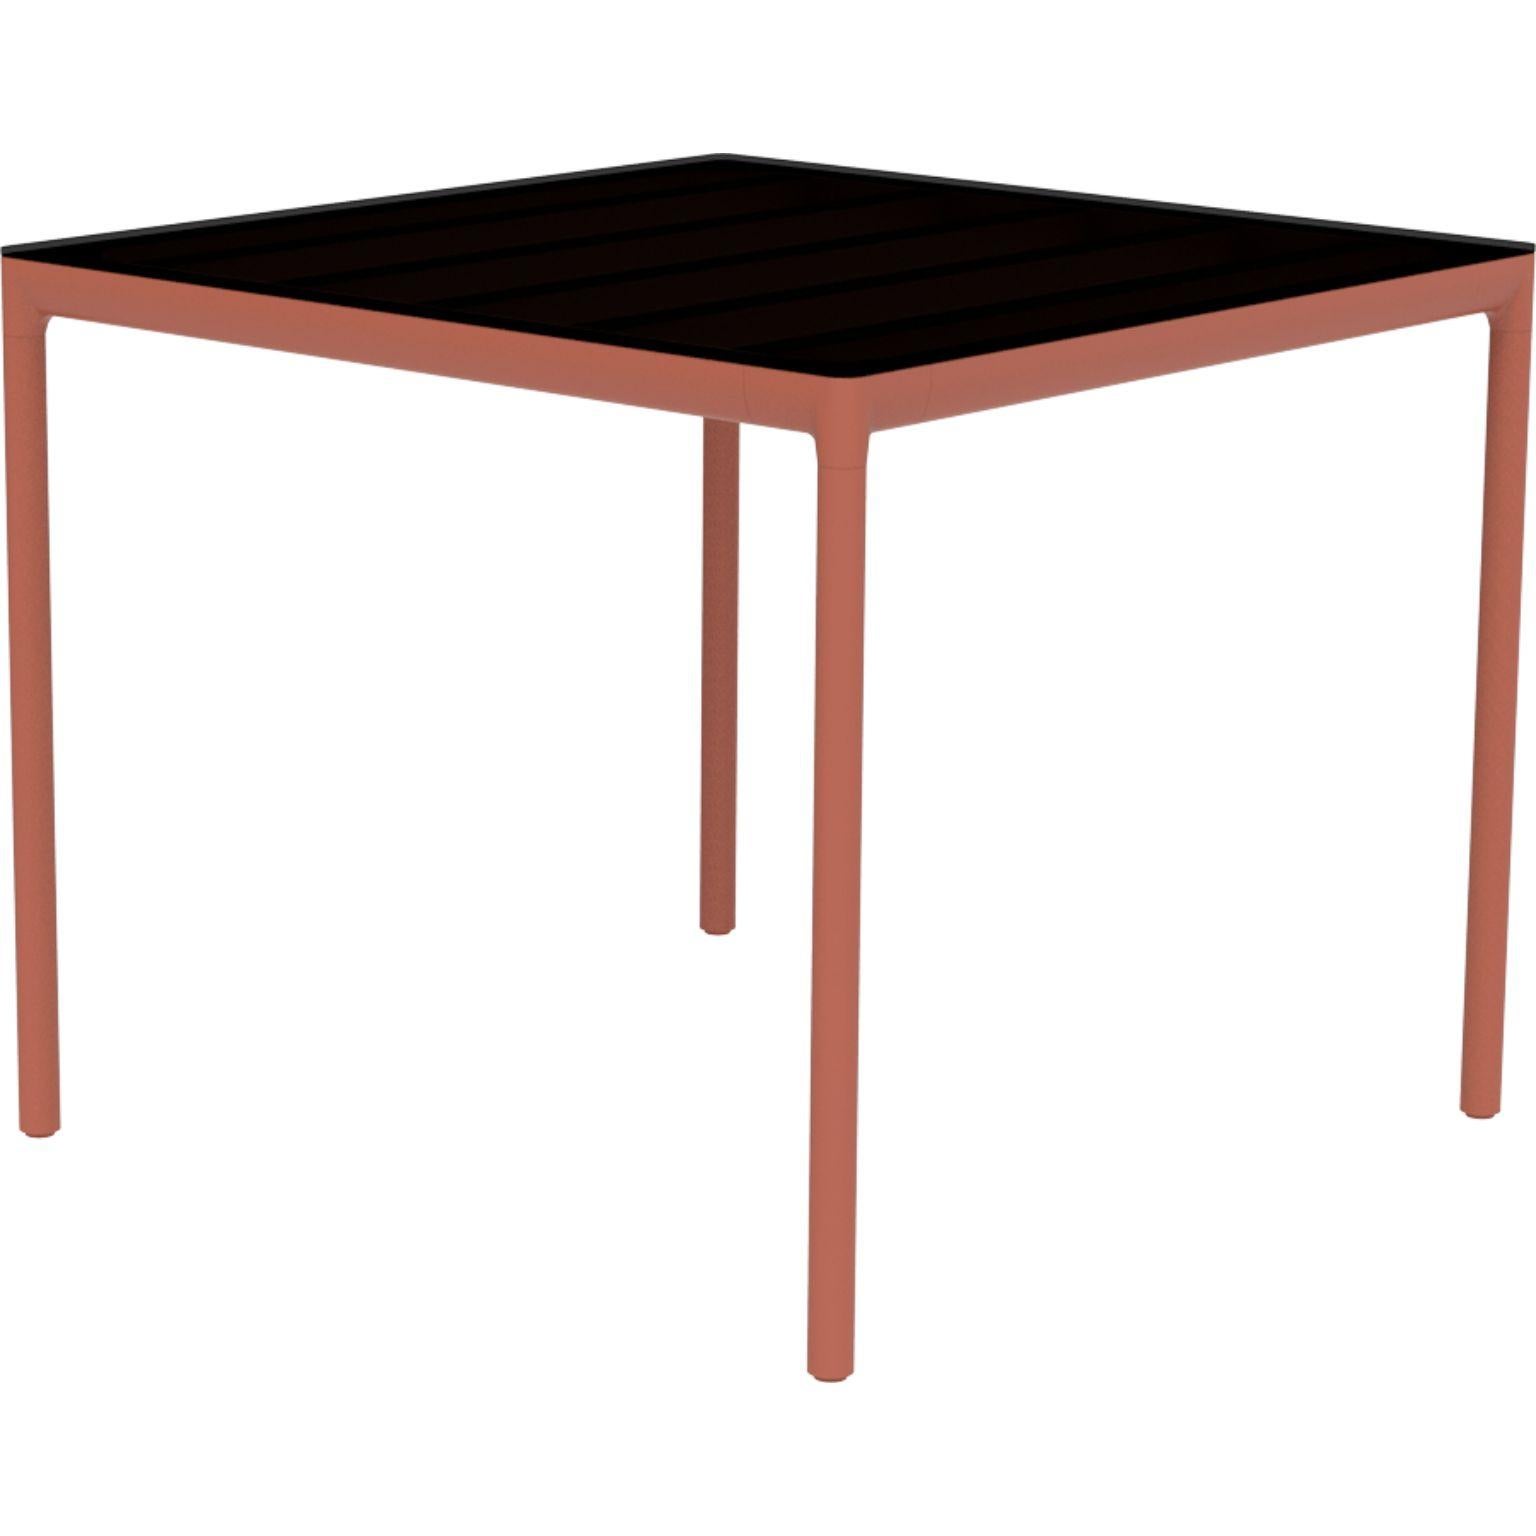 Ribbons Salmon 90 table by MOWEE.
Dimensions: D90 x W90 x H75 cm.
Material: Aluminium and HPL top.
Weight: 16 kg.
Also available in different colors and finishes. (HPL Black Edge or Neolith top).

An unmistakable collection for its beauty and